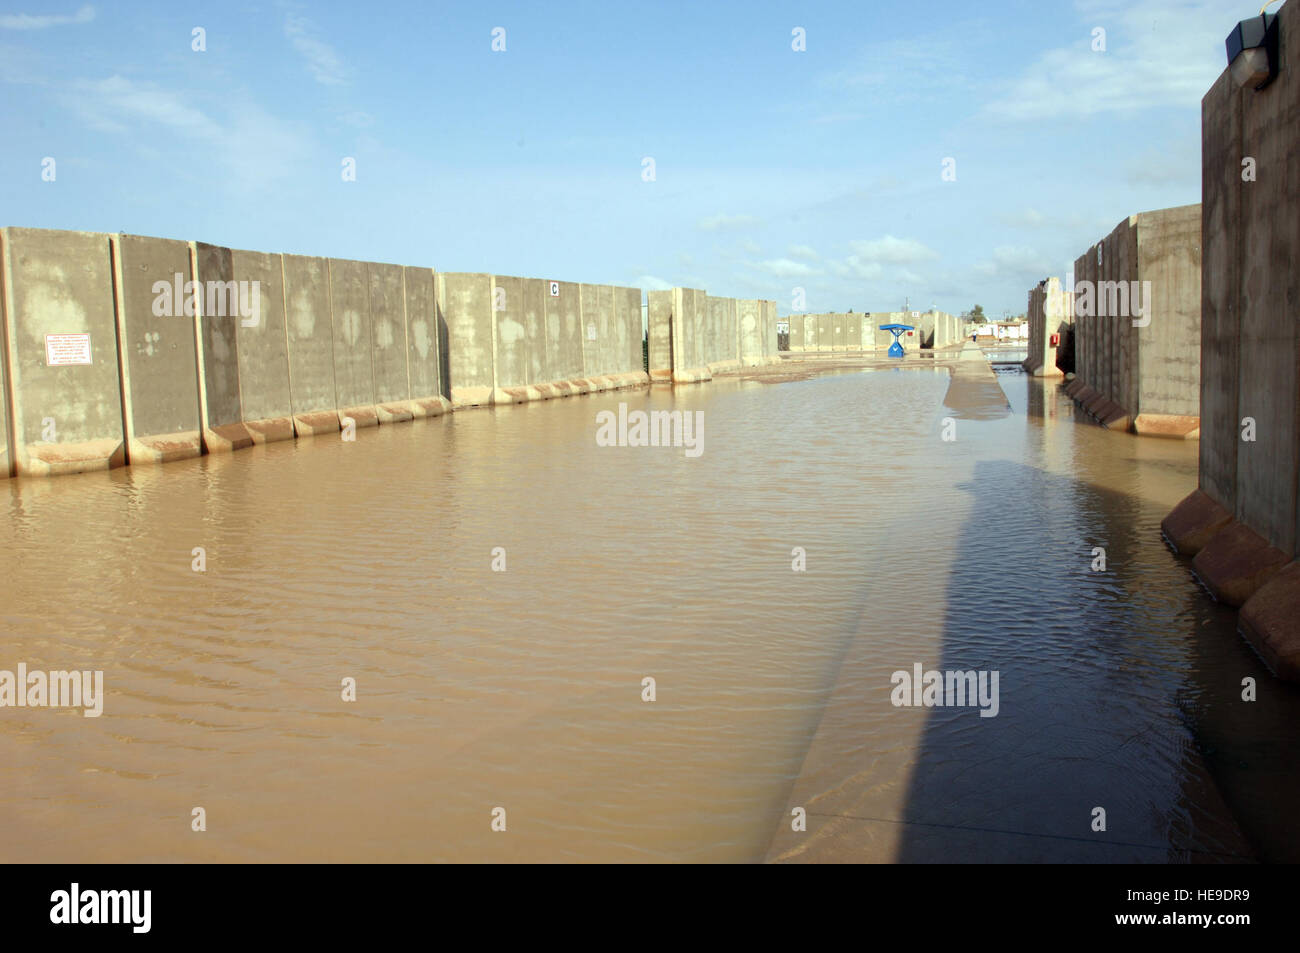 Water floods a housing area at Joint Base Balad, Iraq, Oct. 25. Because rain is infrequent in Iraq, when it does rain, the hardened ground soaks up little water. Tech. Sgt. Erik Gudmundson) Stock Photo